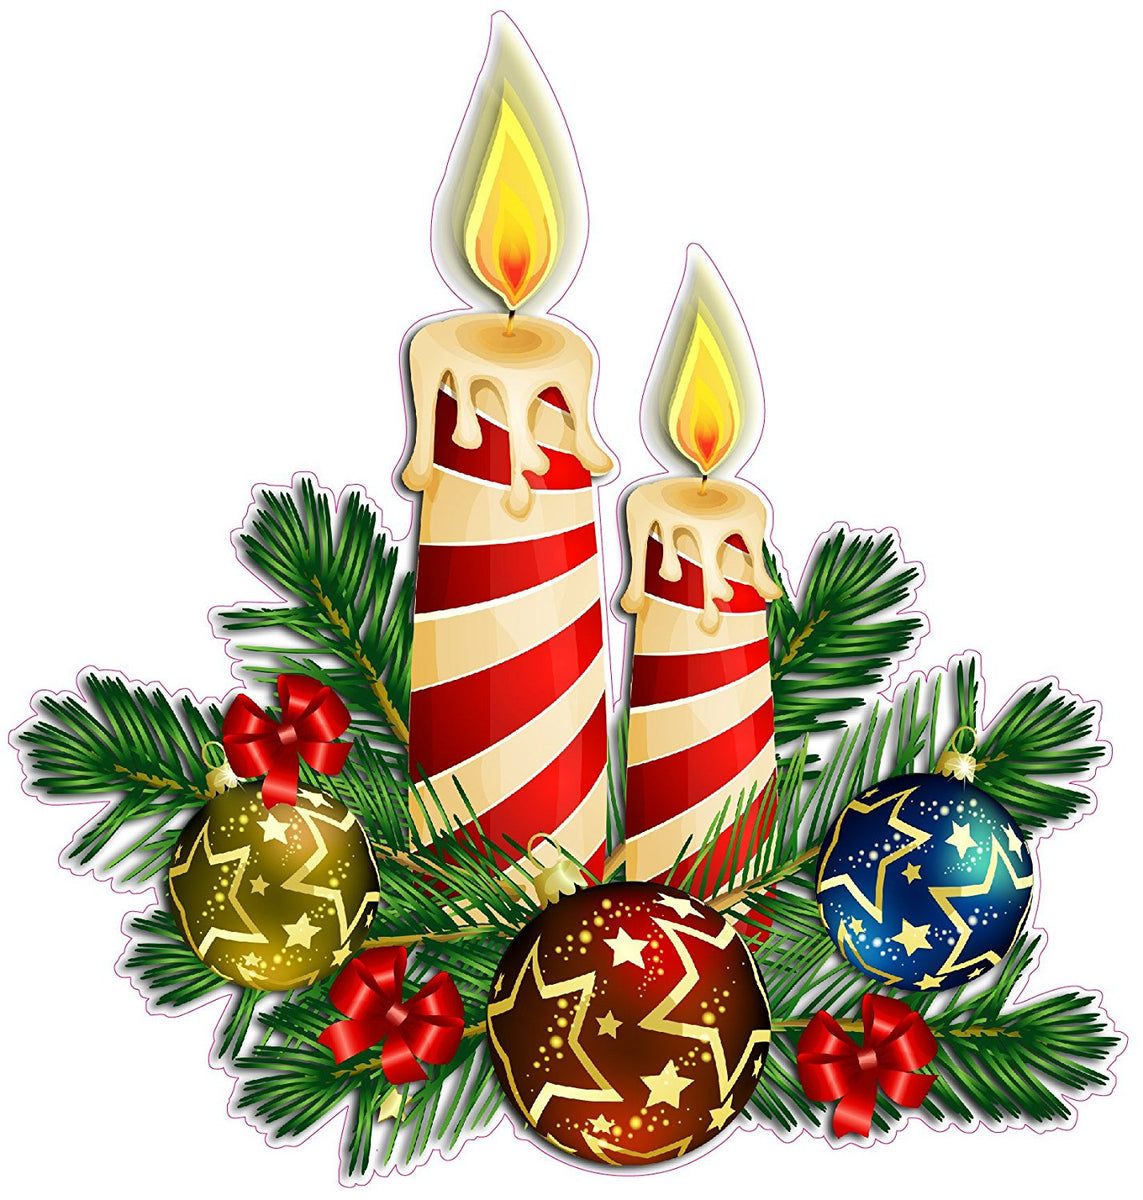 Christmas Candle Wall or Window Decor Decal | Nostalgia Decals Wall ...